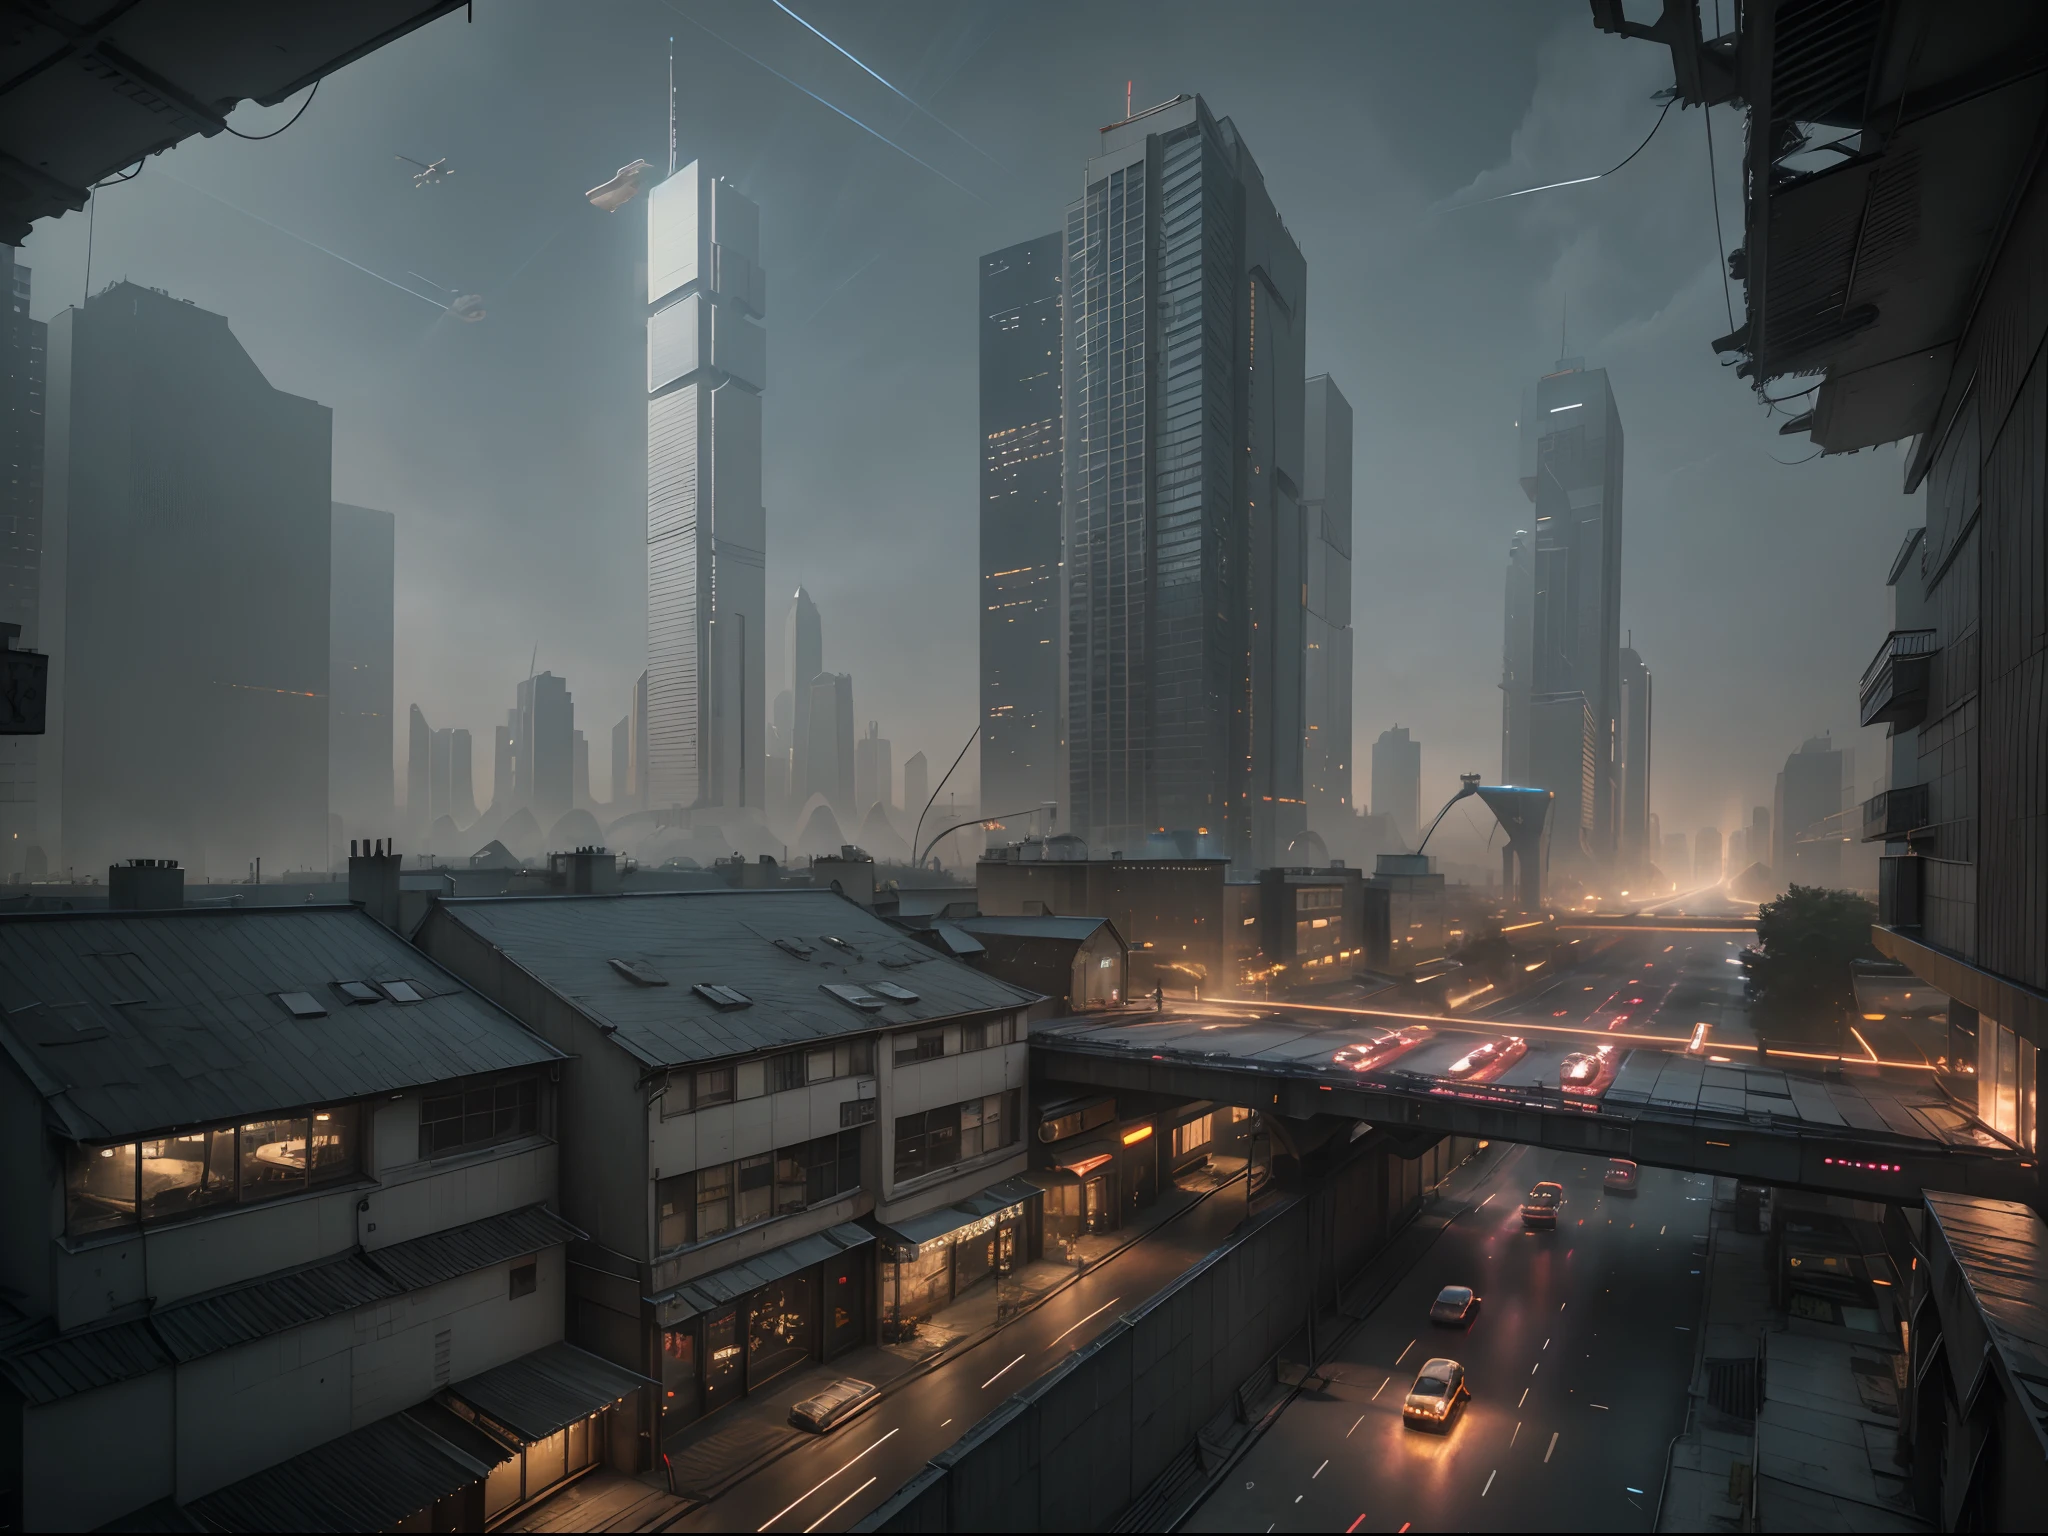 Cyberpunk cityscape street scene with towering skyscrapers, glowing neon signs and LED lights, traffic with futuristic cyberpunk cars and ((flying cars in the sky)), dark atmosphere, cinematic lighting, extremely detailed.